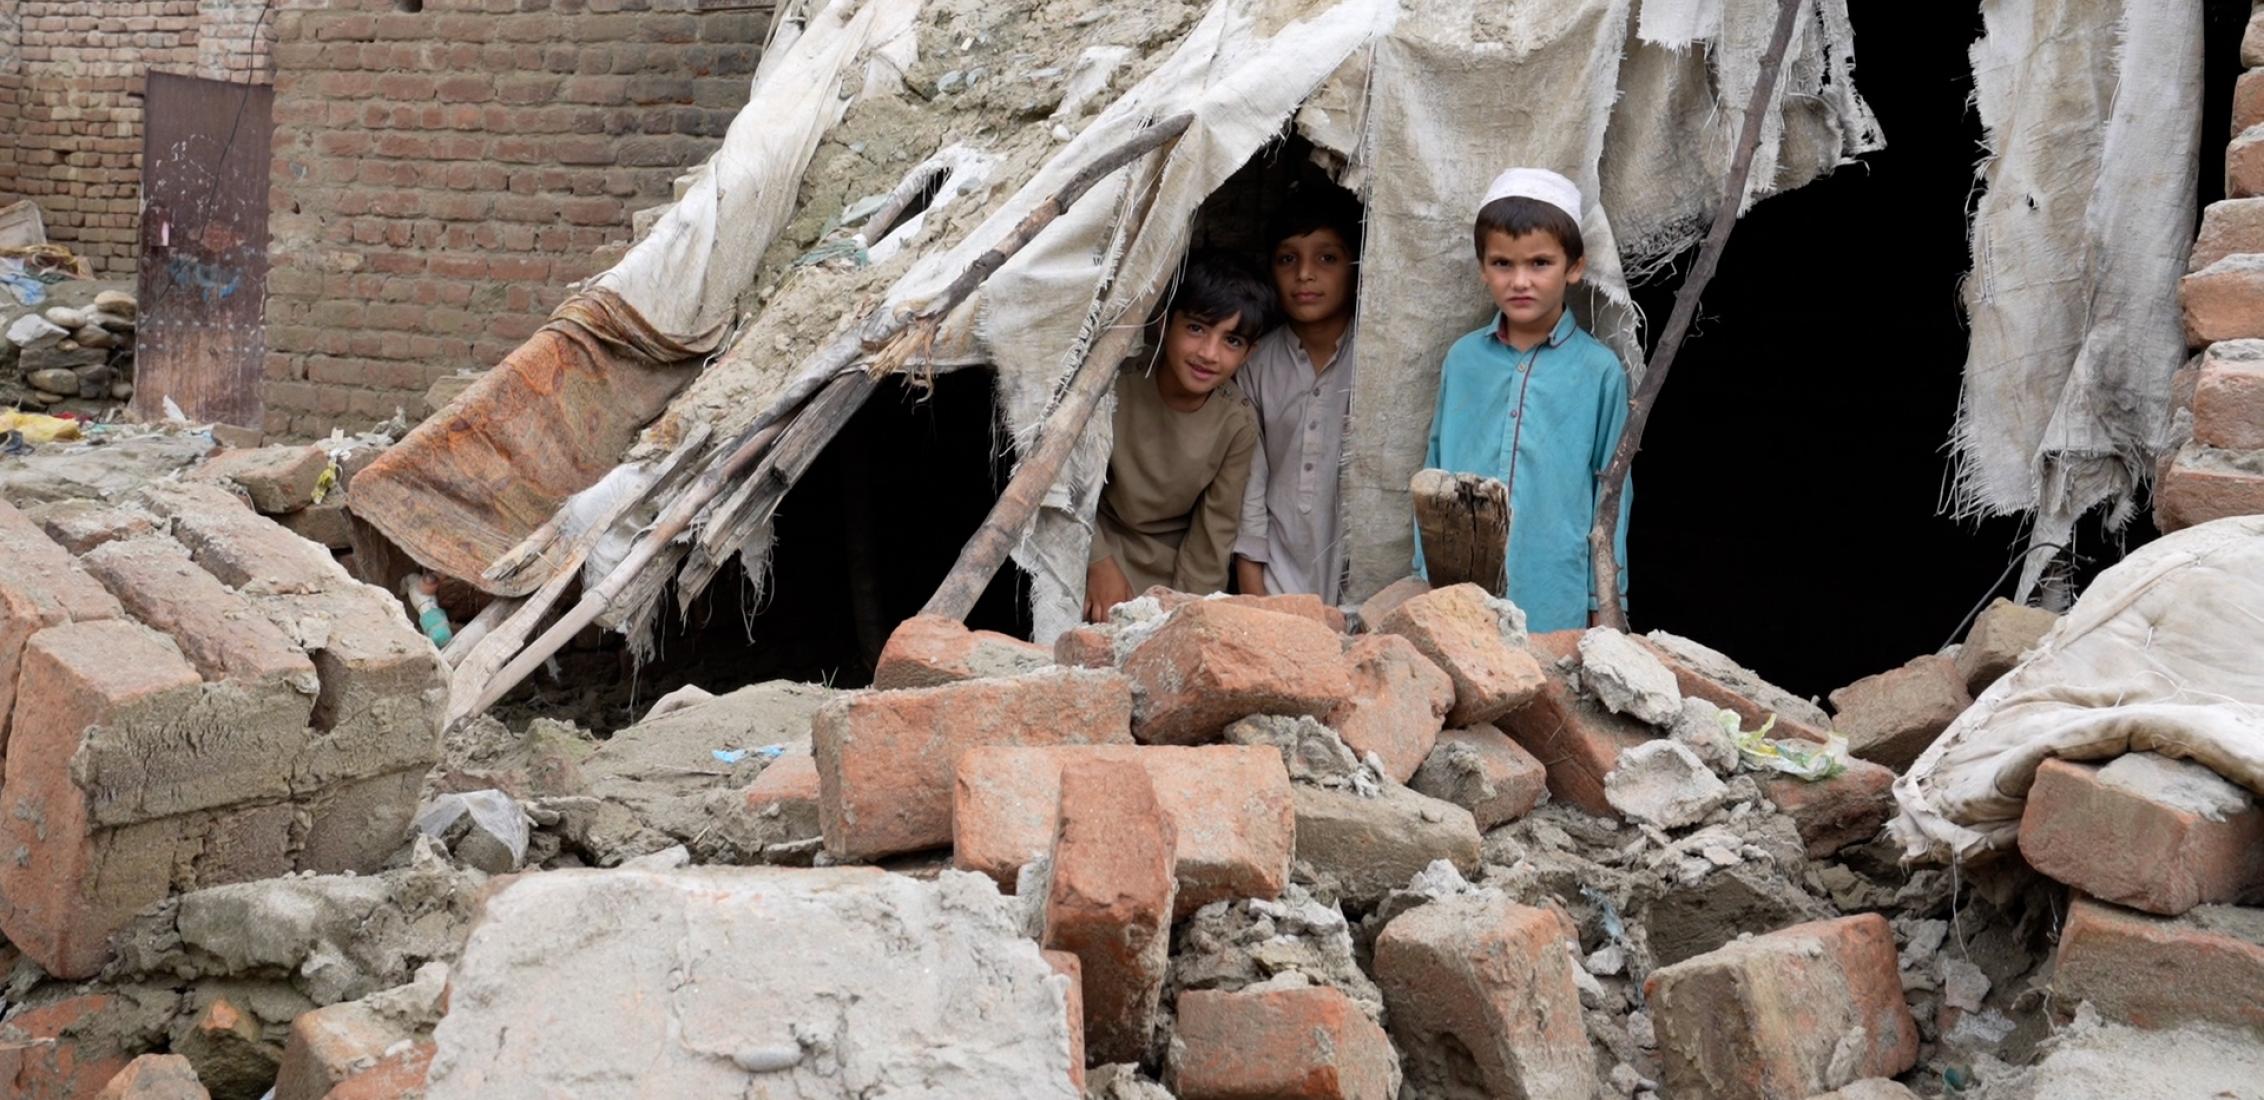 UN0693152/Fazel: On 22 August 2023, three young boys huddled under the wreckage of their home in Jalalabad, which was destroyed by the recent floods in Nangarhar province, eastern Afghanistan.